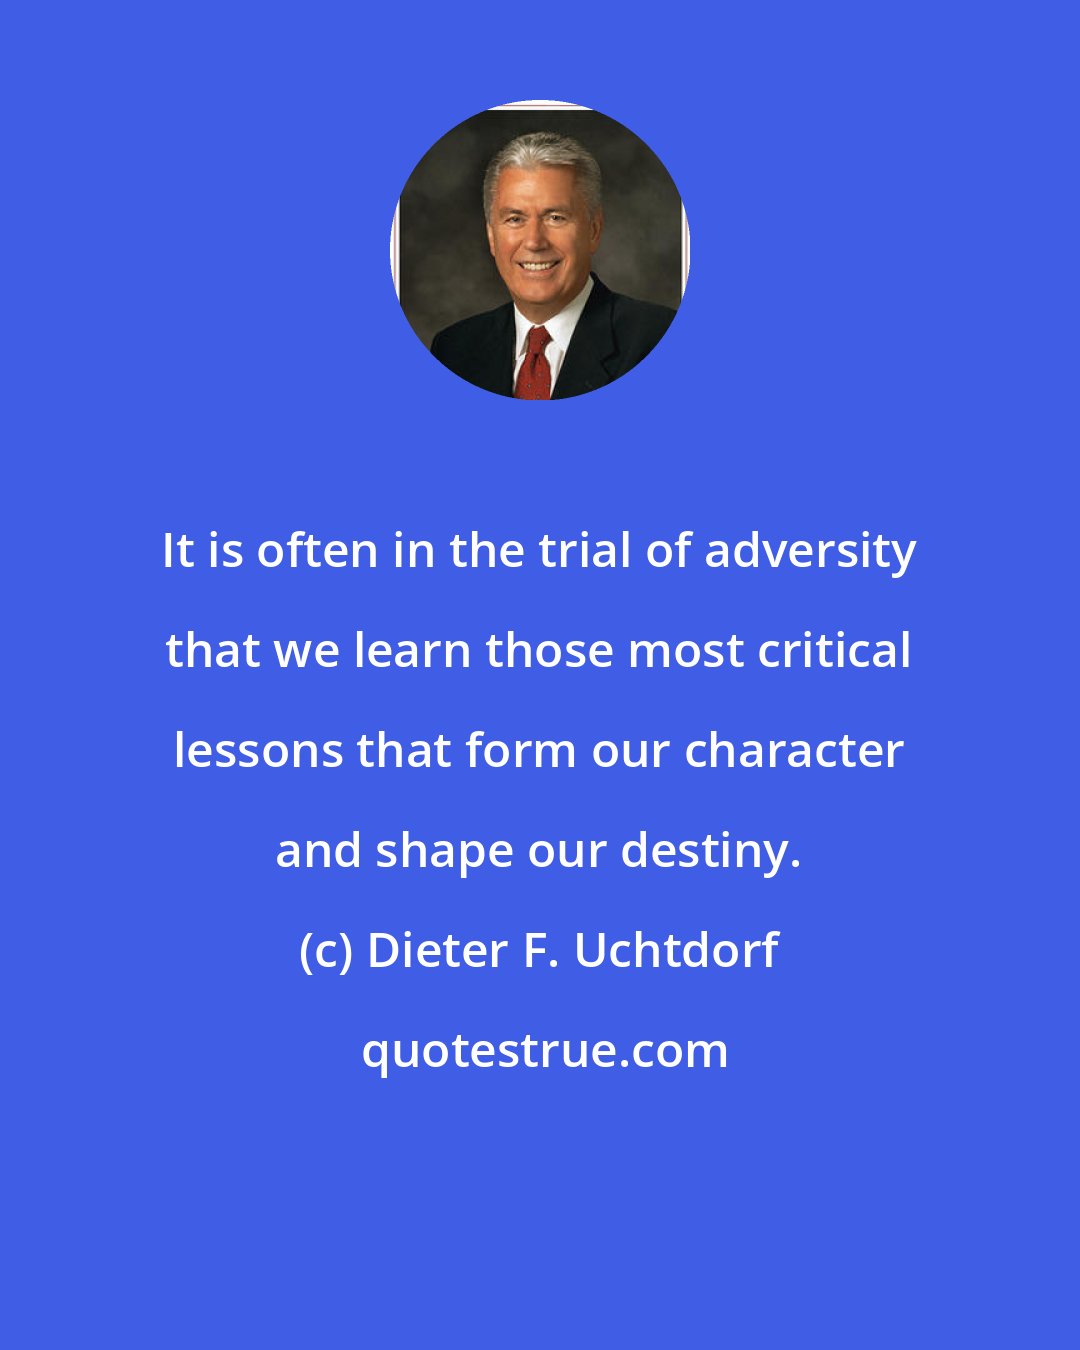 Dieter F. Uchtdorf: It is often in the trial of adversity that we learn those most critical lessons that form our character and shape our destiny.